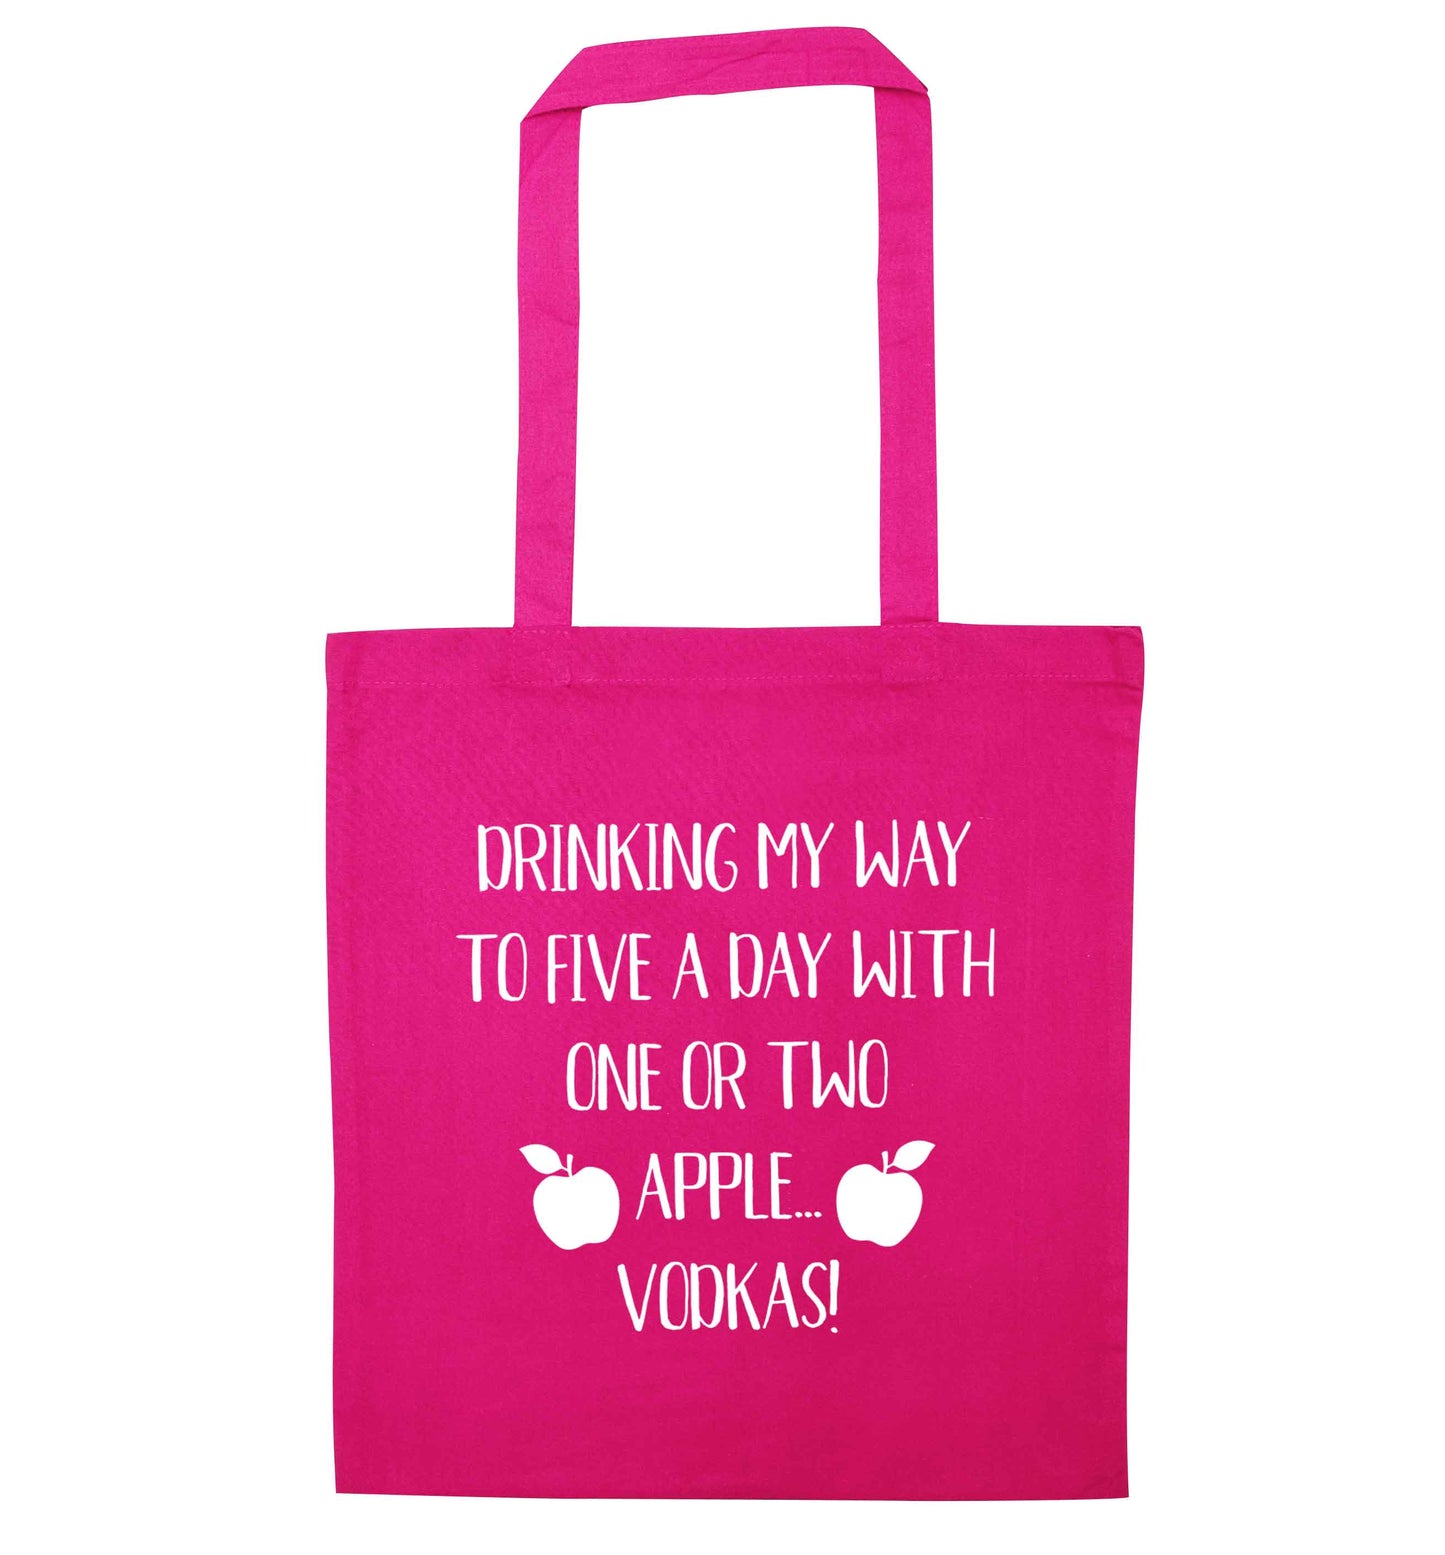 Drinking my way to five a day with one or two apple vodkas pink tote bag